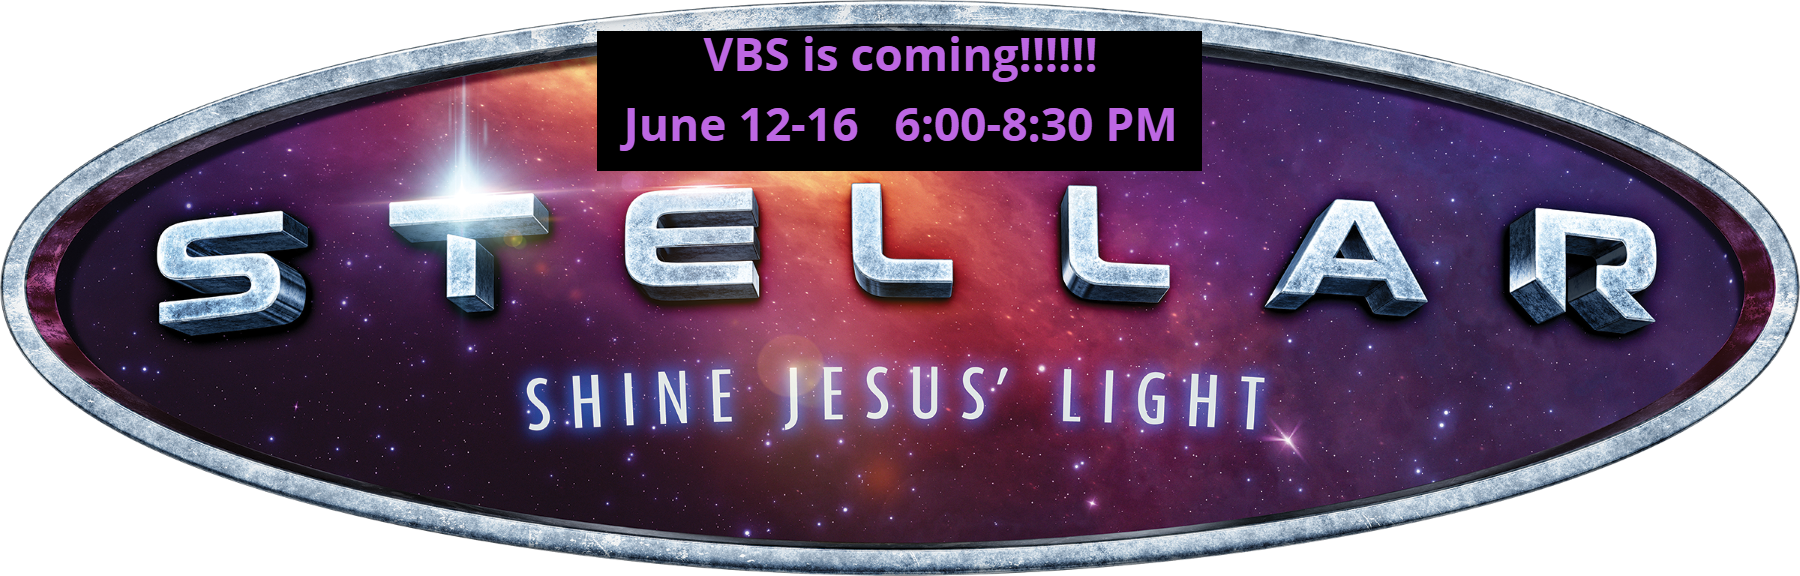 VBS coming June 12 - 16!  6:00-8:30 PM